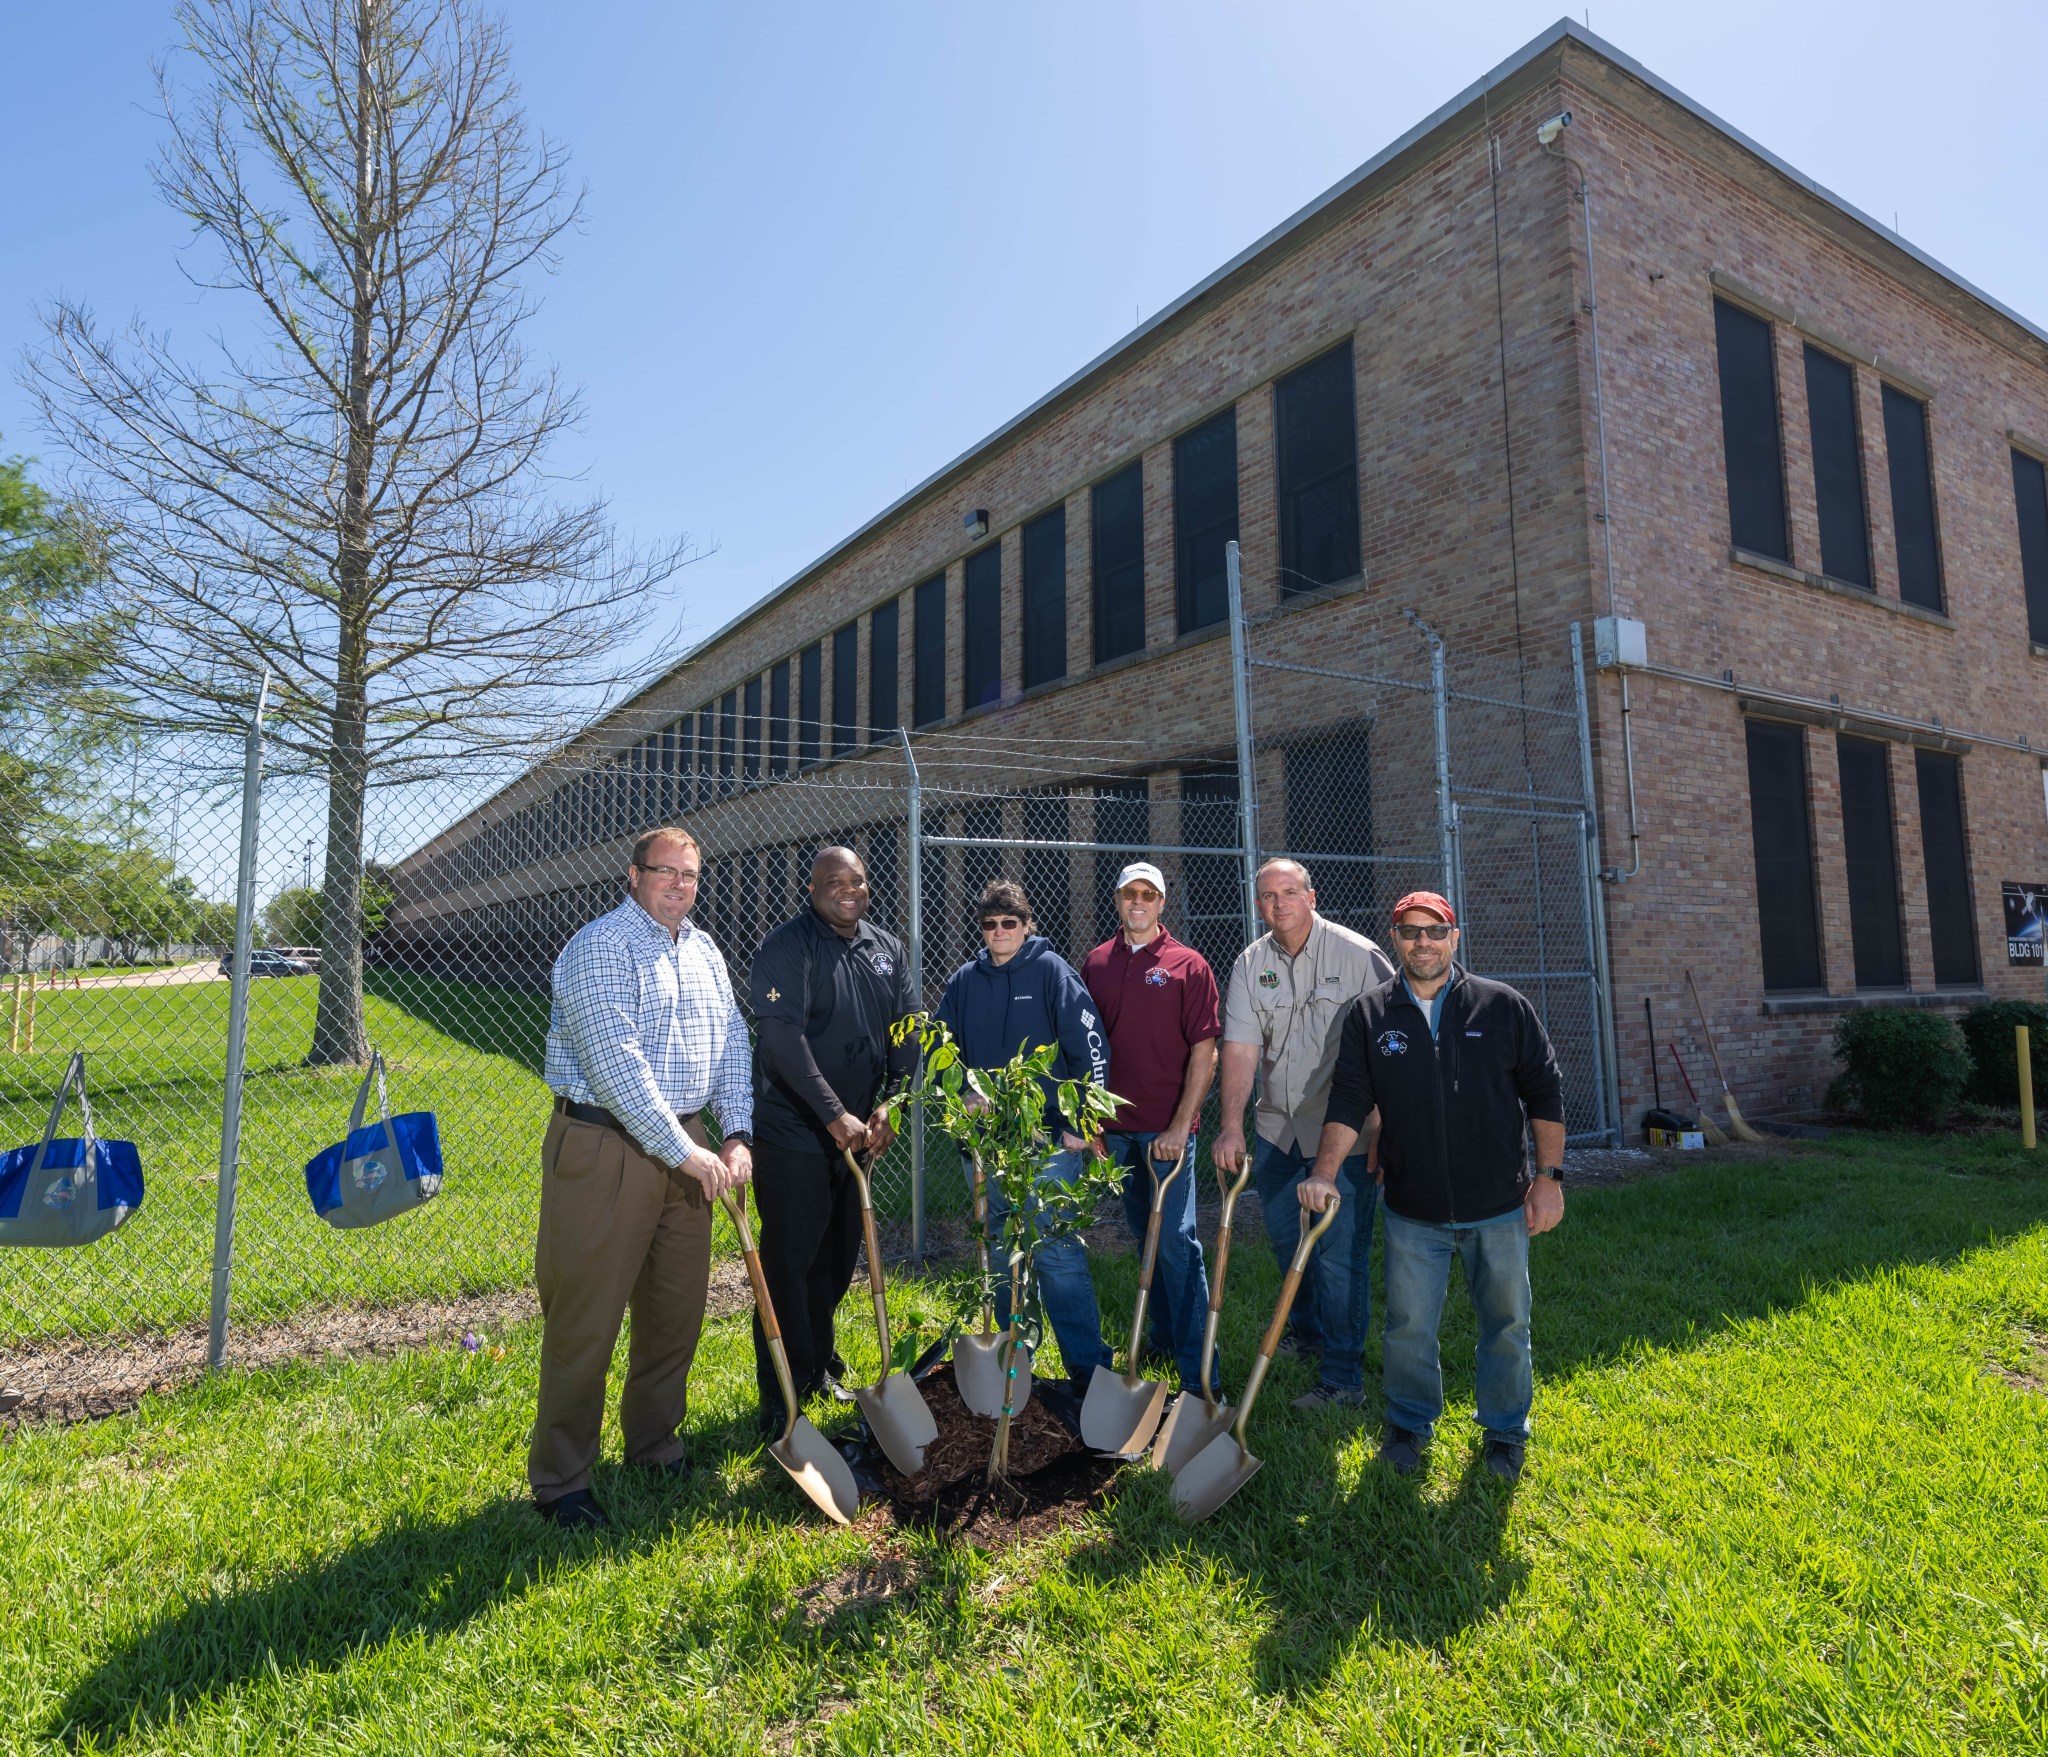 From left, Boeing Michoud Deputy Site Leader Brad Saxton, Michoud Assembly Facility Director Hansel Gill, Textron Supervisor Inventory Control/Shipping MAF/Stone Road Wendy Dedeaux, Lockheed Martin Environmental Health and Safety Engineer Darrell Christian, Michoud Environmental Officer Ben Ferrell, and Syncom Space Services Environmental Manager Eric Stack pack in dirt and mulch around a newly planted satsuma tree at Michoud.